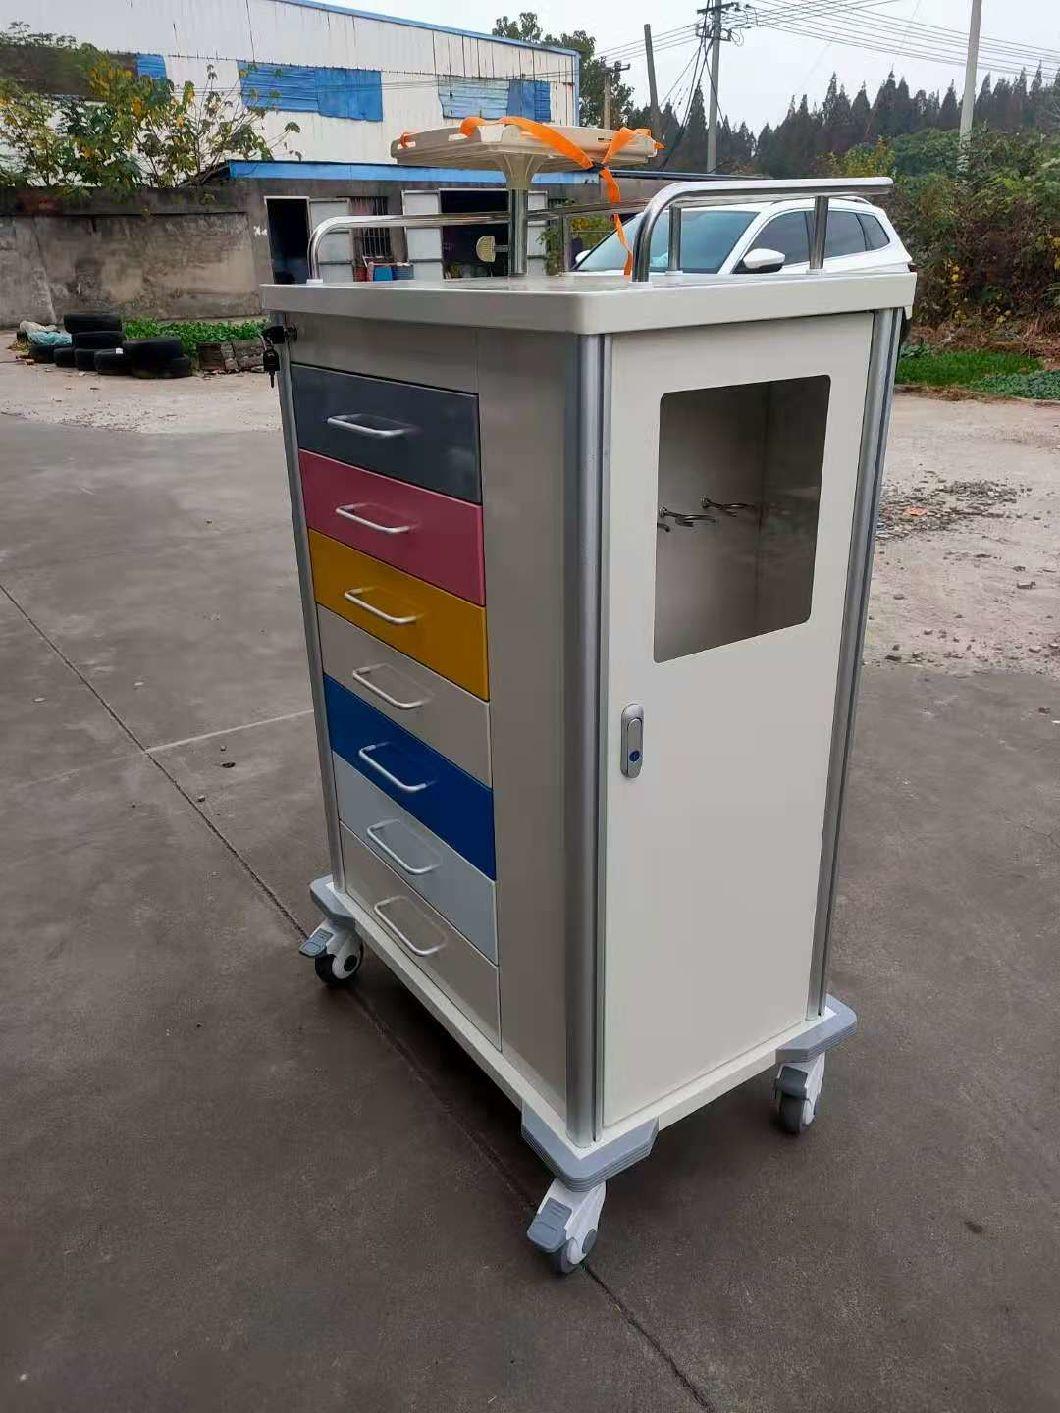 Factory Direct First-Aid ABS Medicine Delivery Trolley Infusion Vehicle Cart